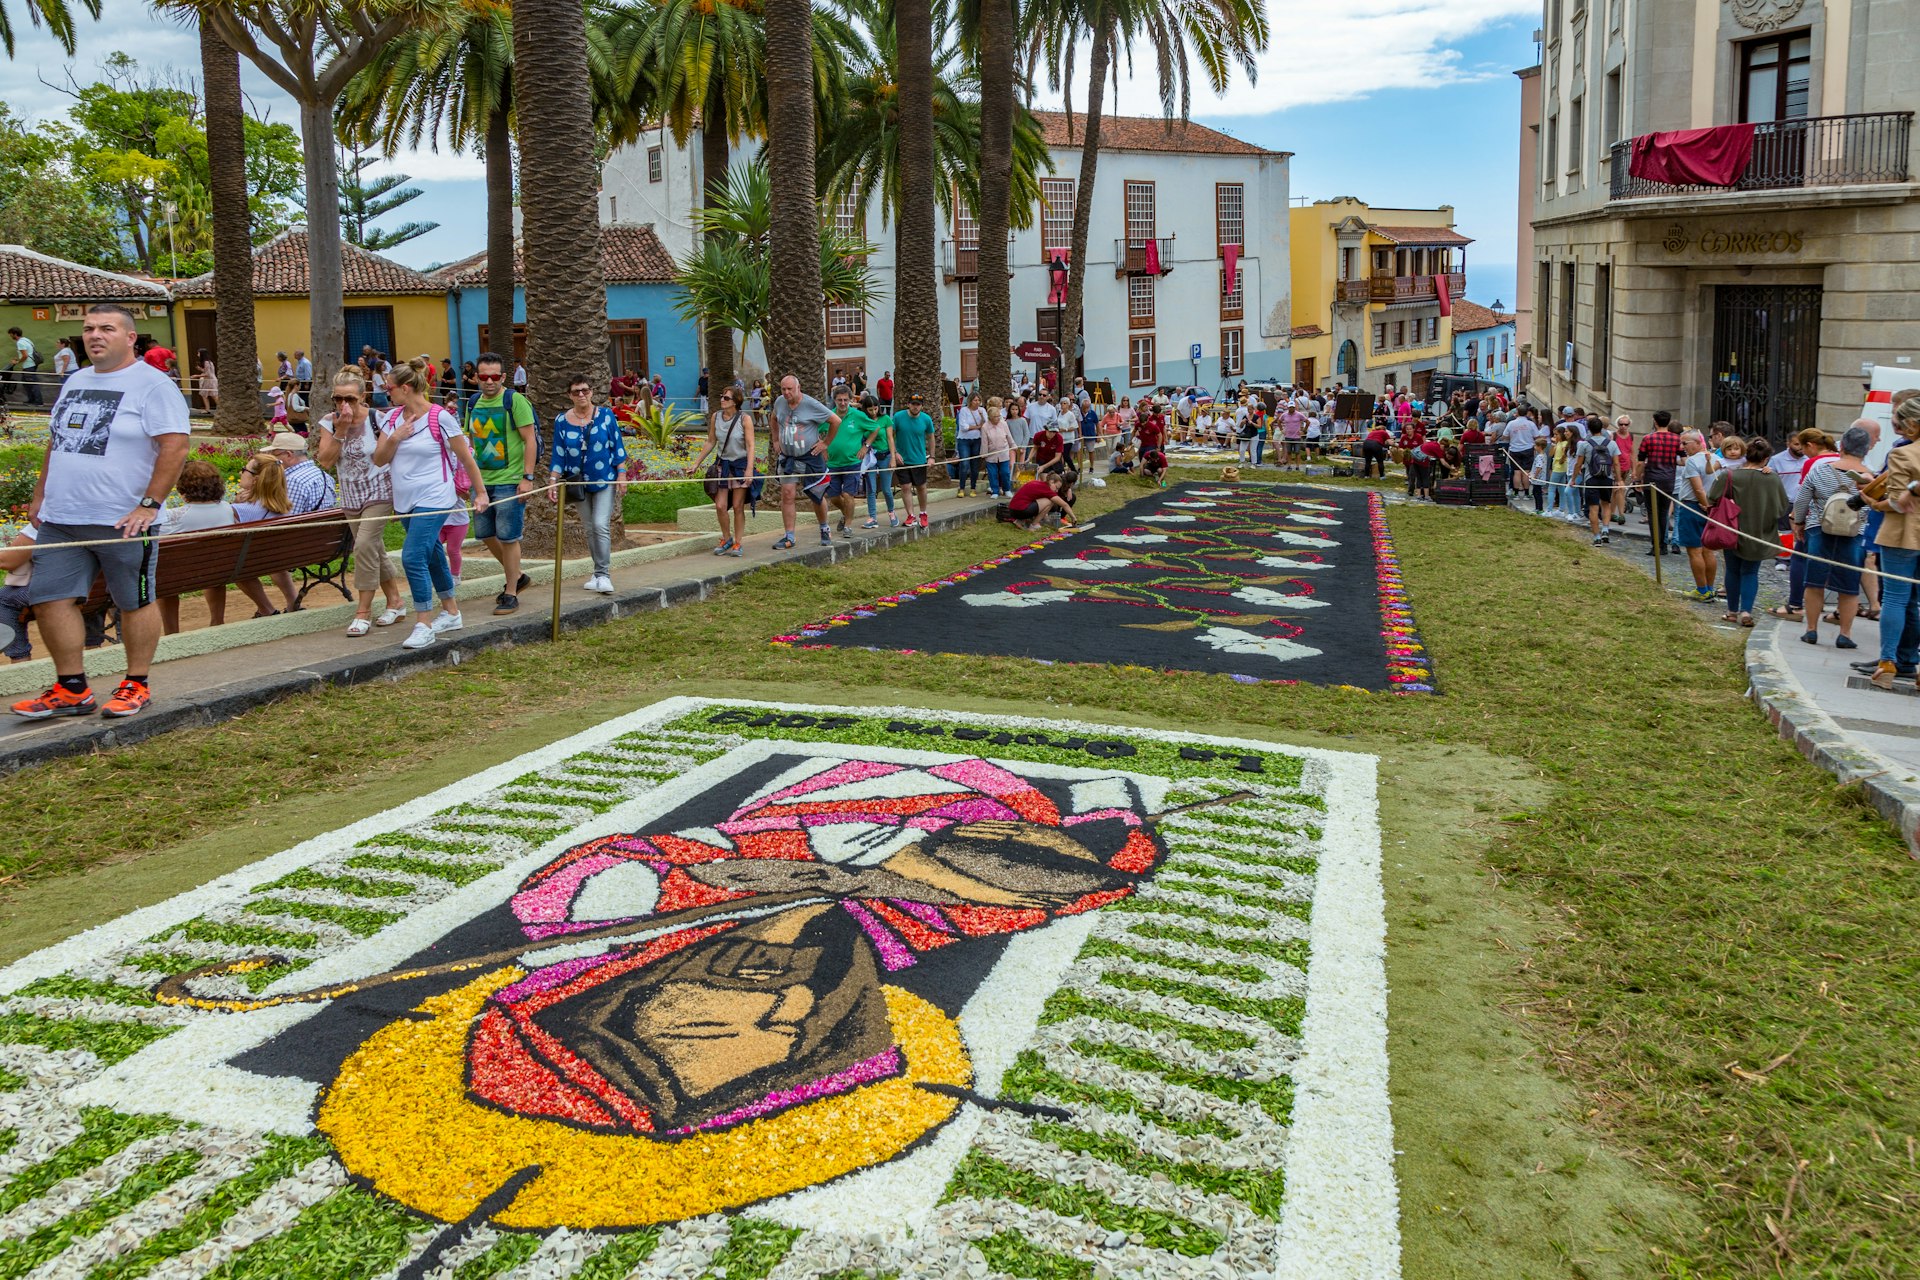 People walking by and looking at flower carpets in La Orotava during Corpus Christi